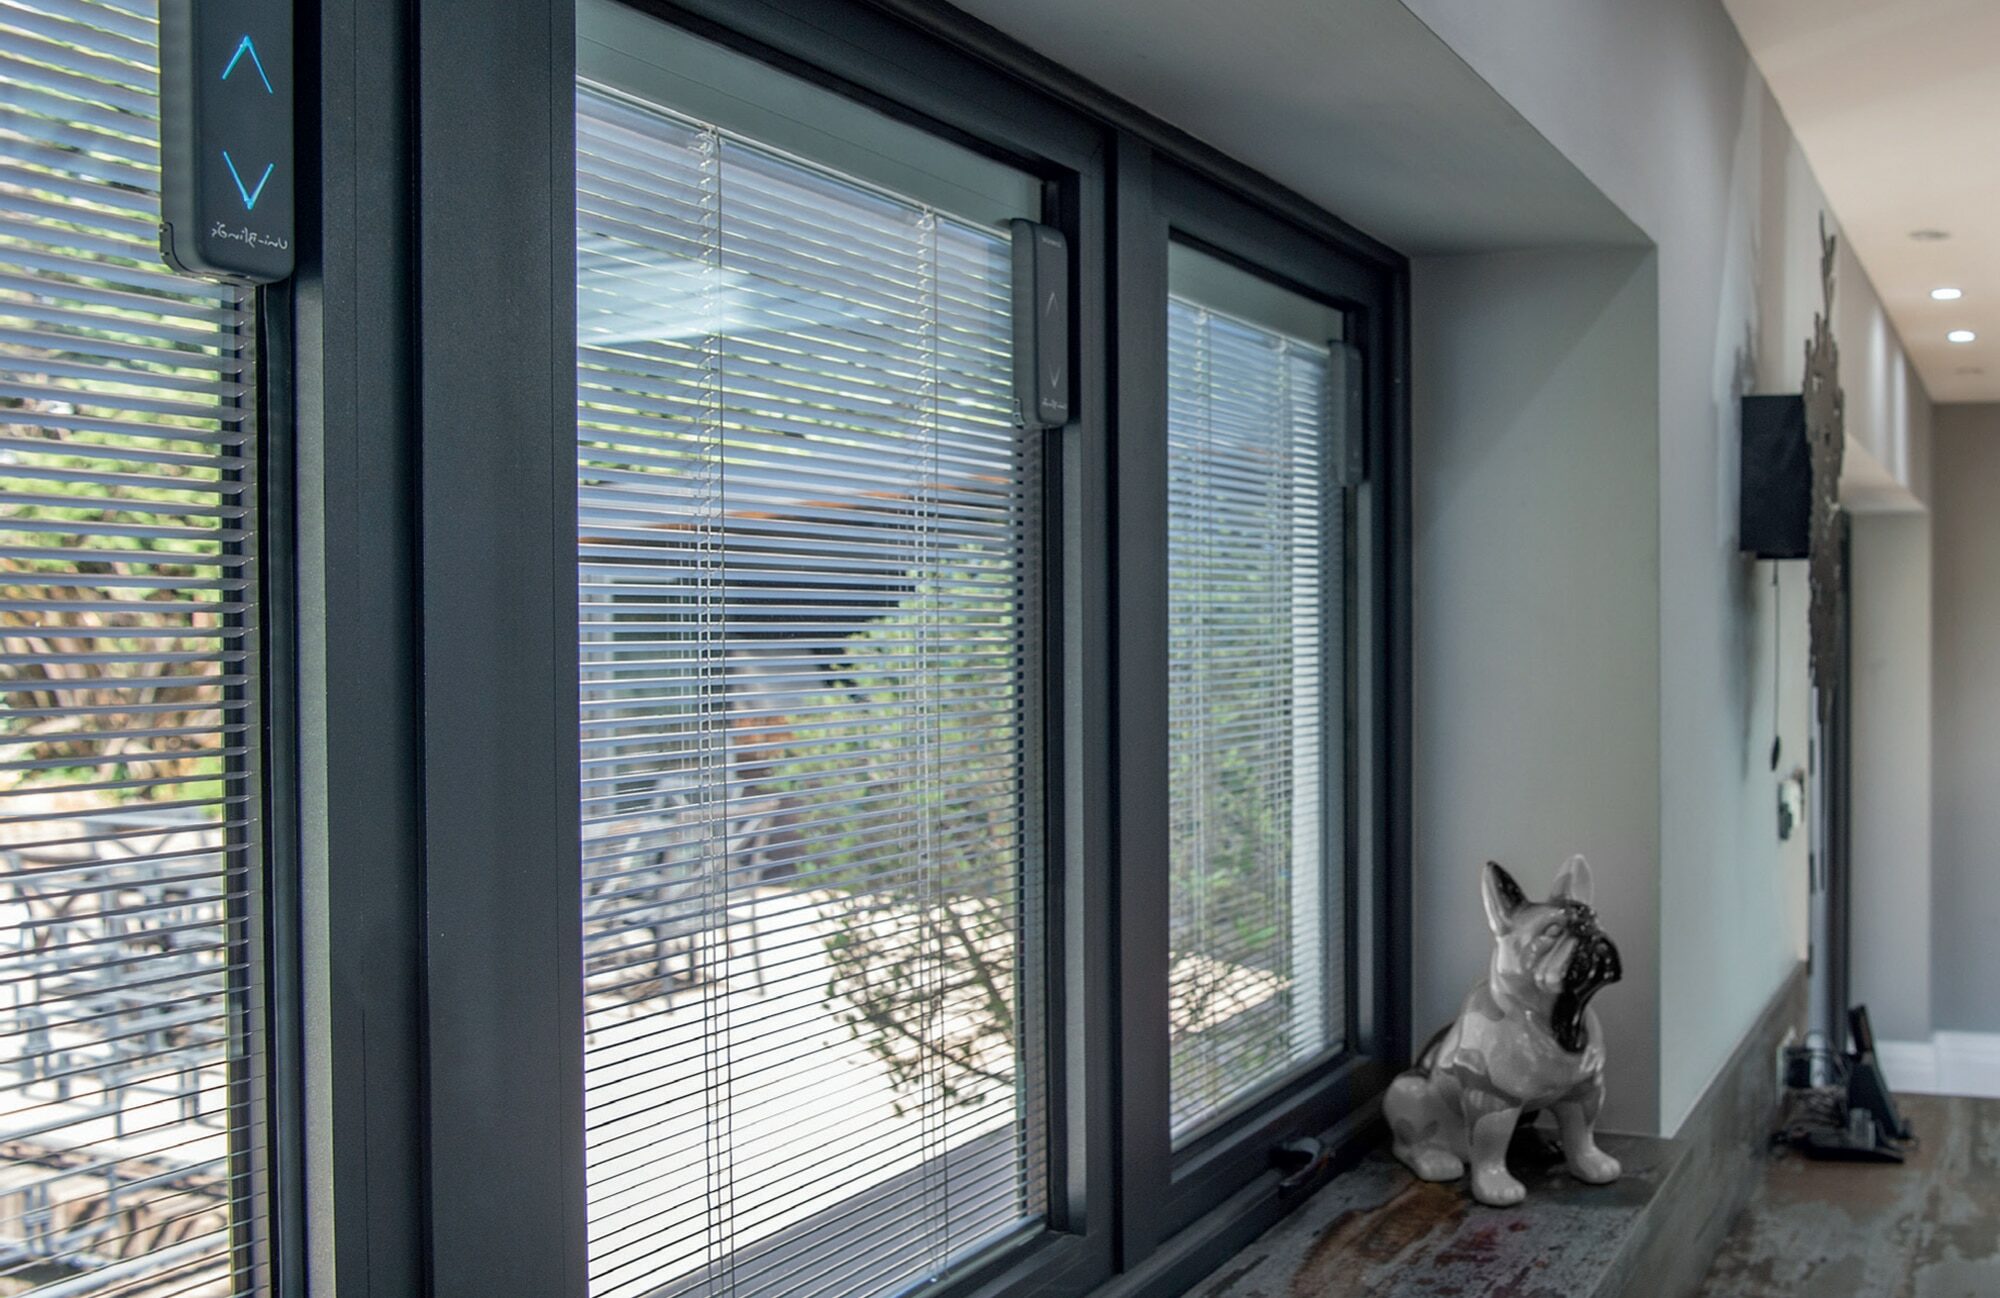 Integral blinds within glass